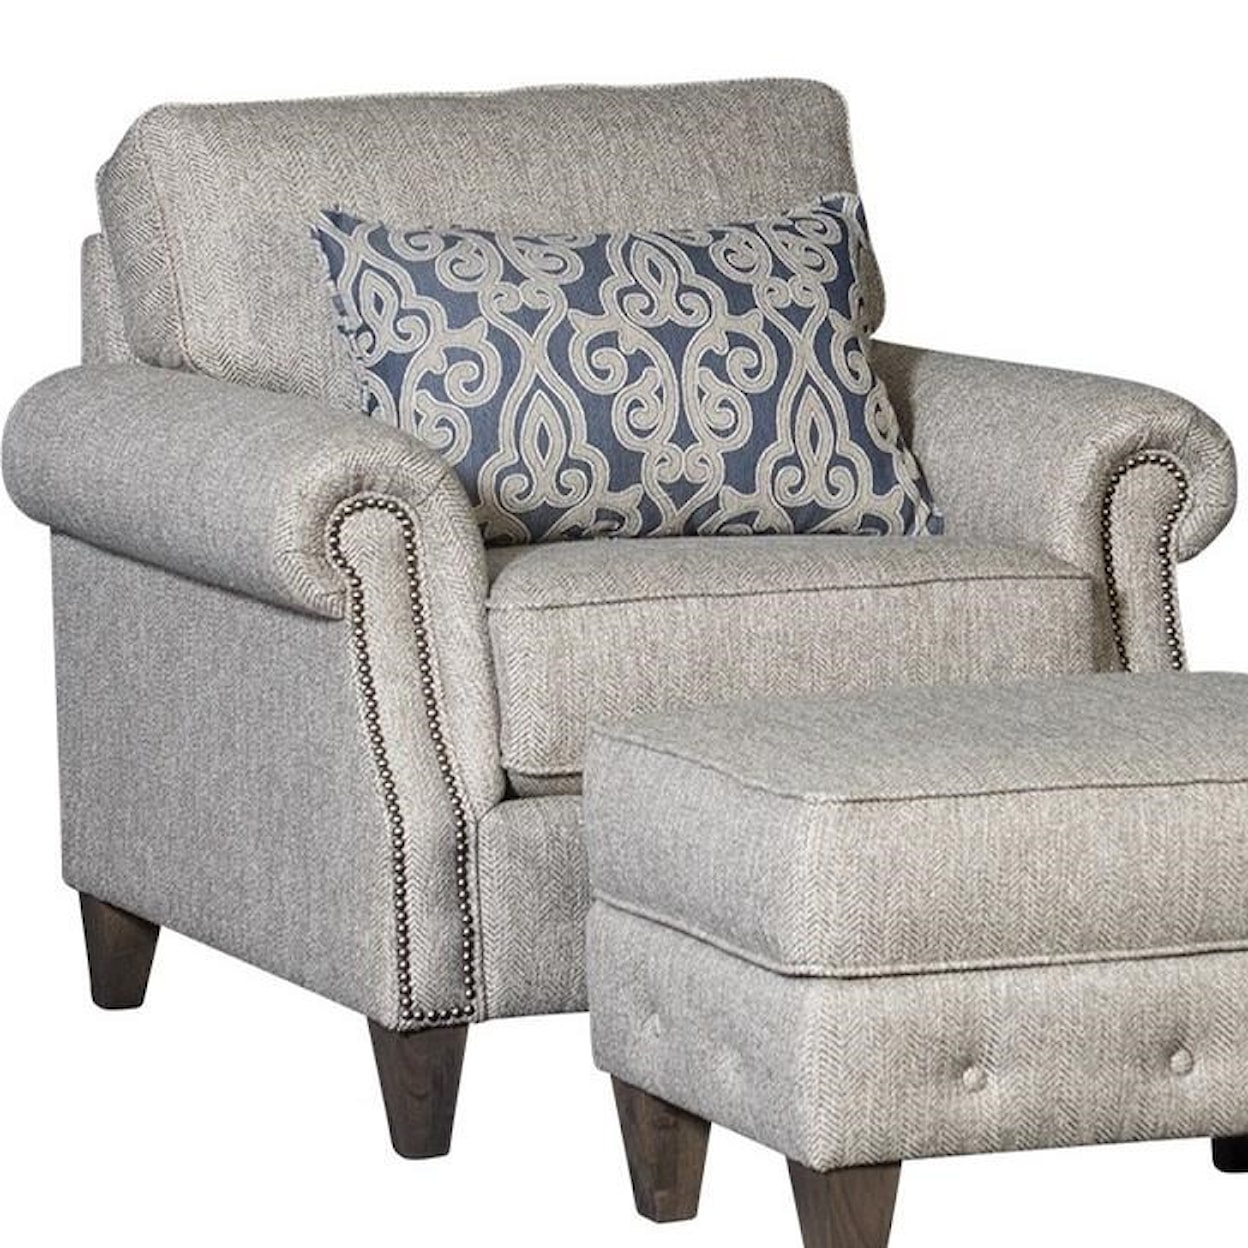 Mayo 4040 Transitional Chair